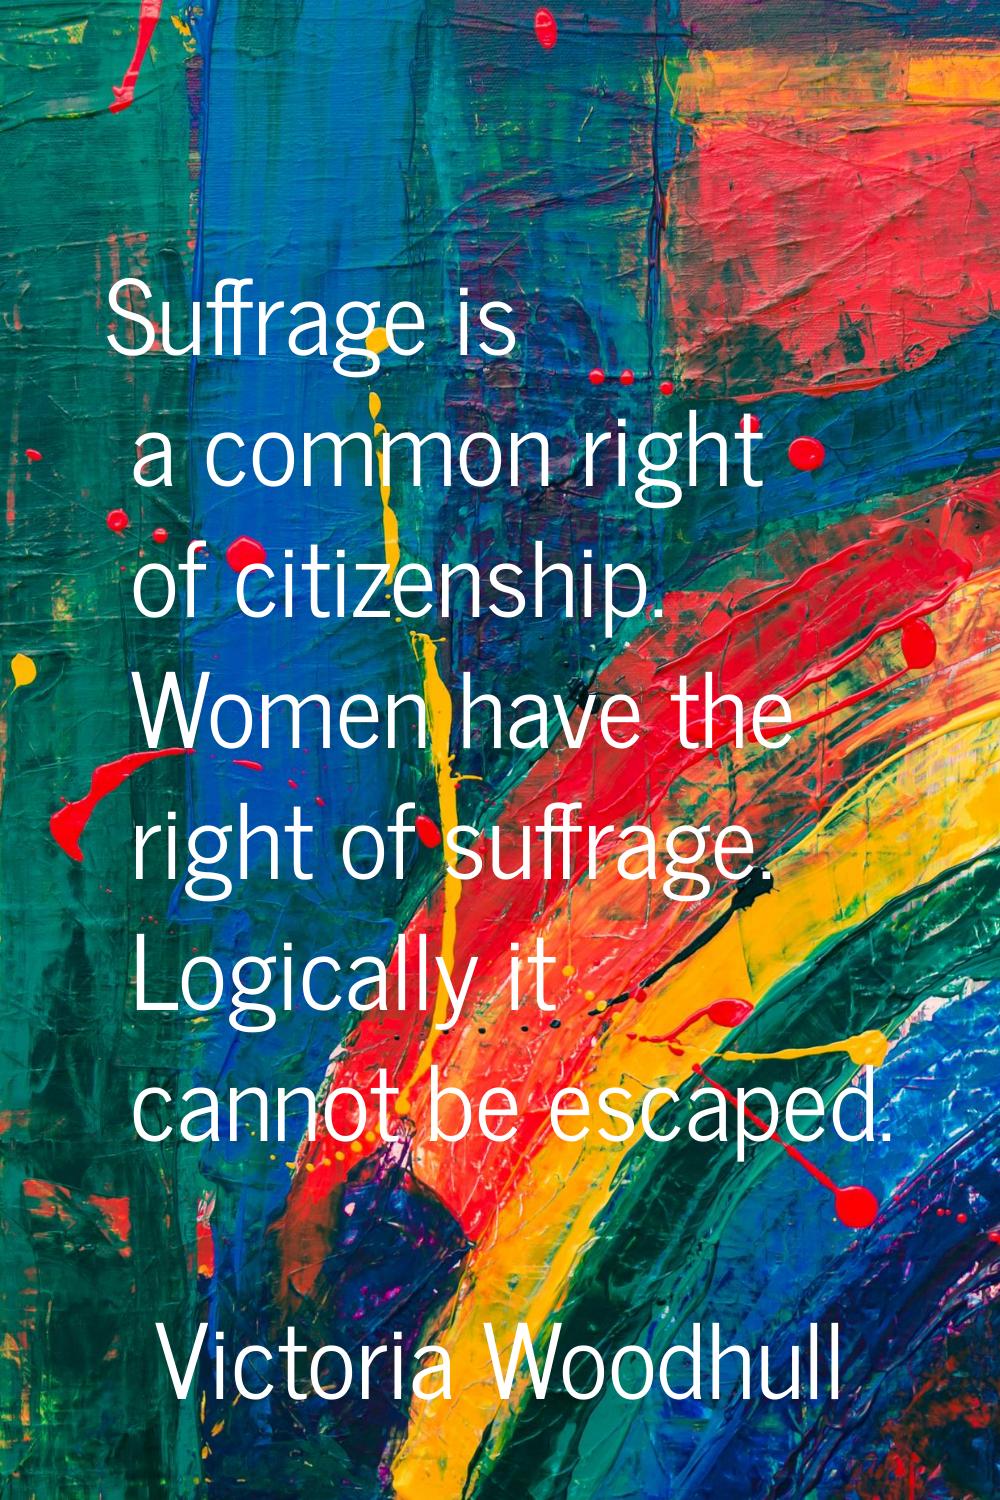 Suffrage is a common right of citizenship. Women have the right of suffrage. Logically it cannot be